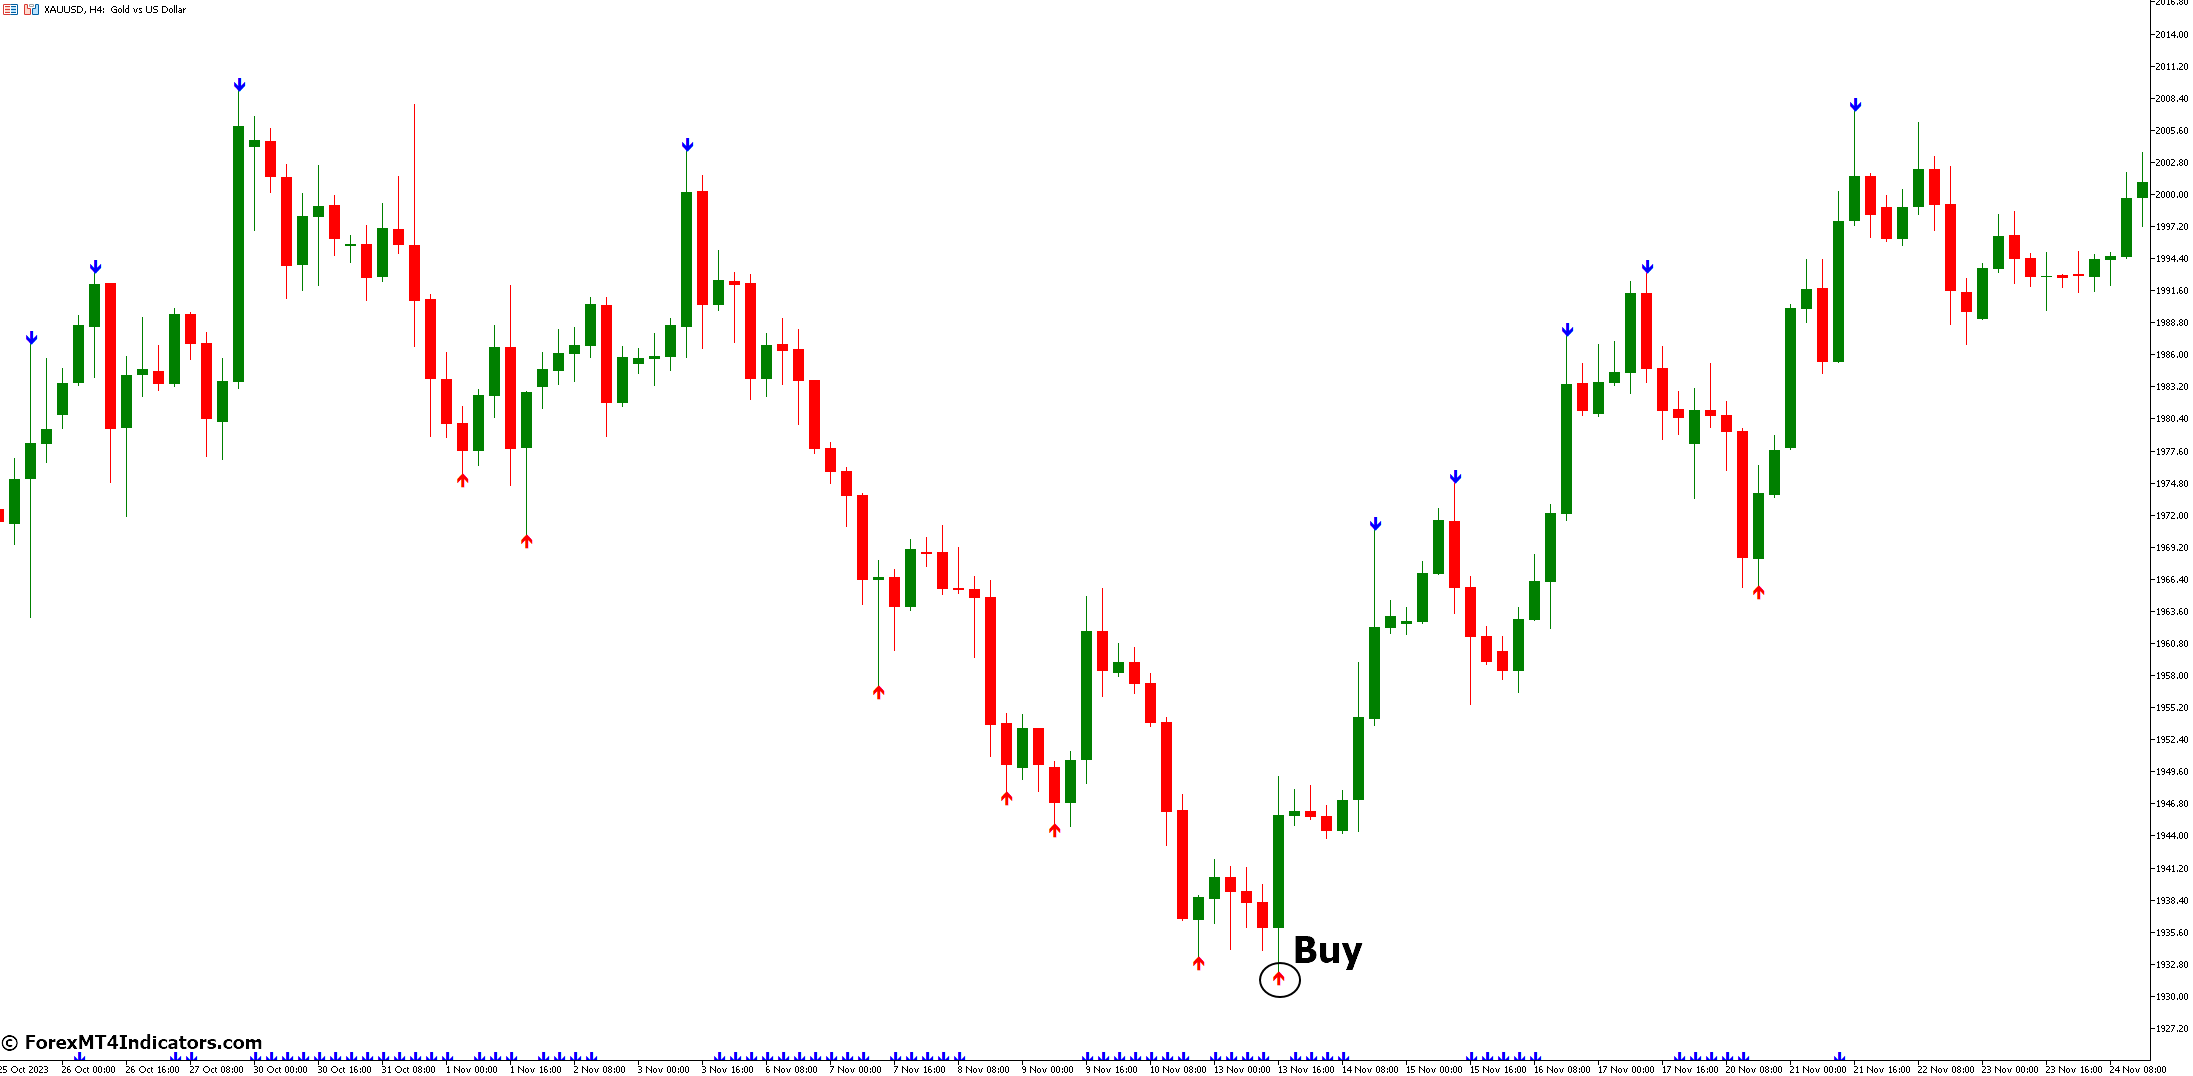 How to Trade with Fractal ZigZag No-Repaint Indicator - Buy Entry